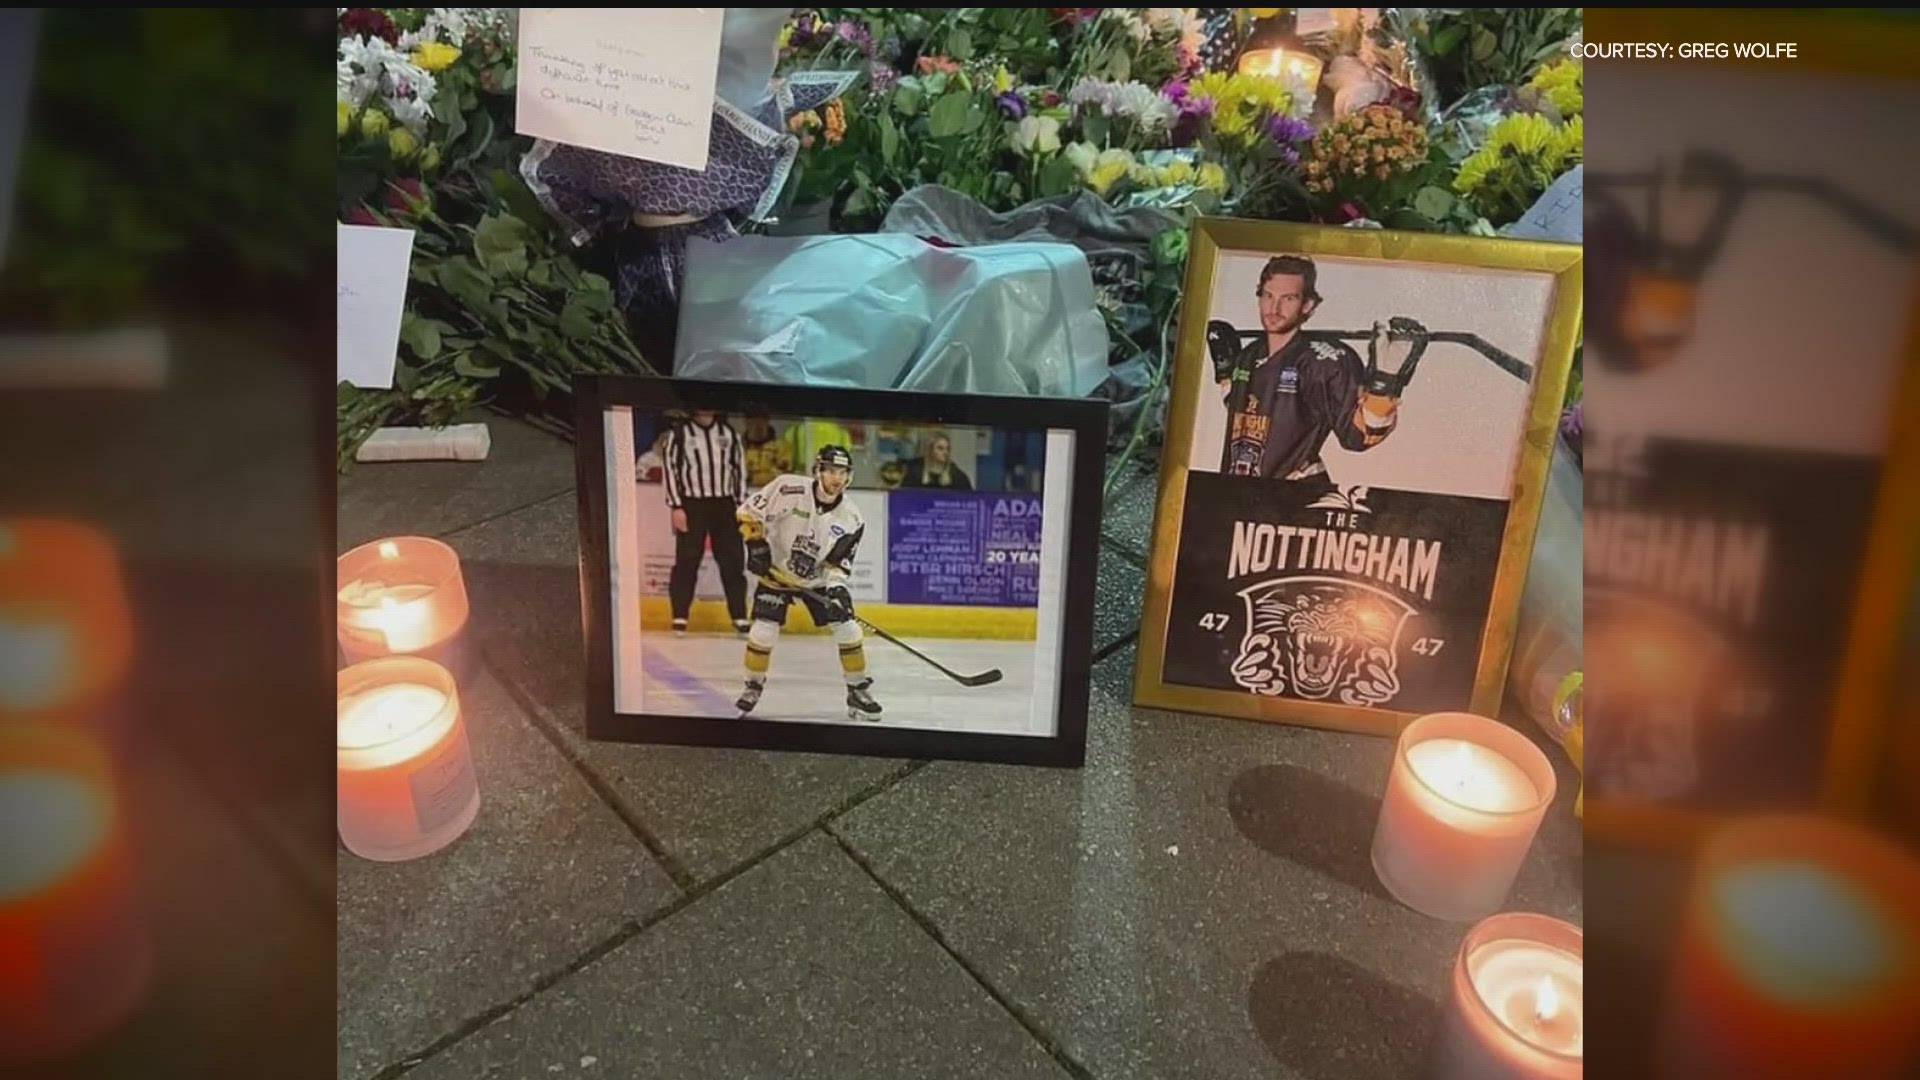 29-year-old Adam Johnson was playing for the Nottingham Panthers in a Challenge Cup game in England when he suffered a slashed neck.